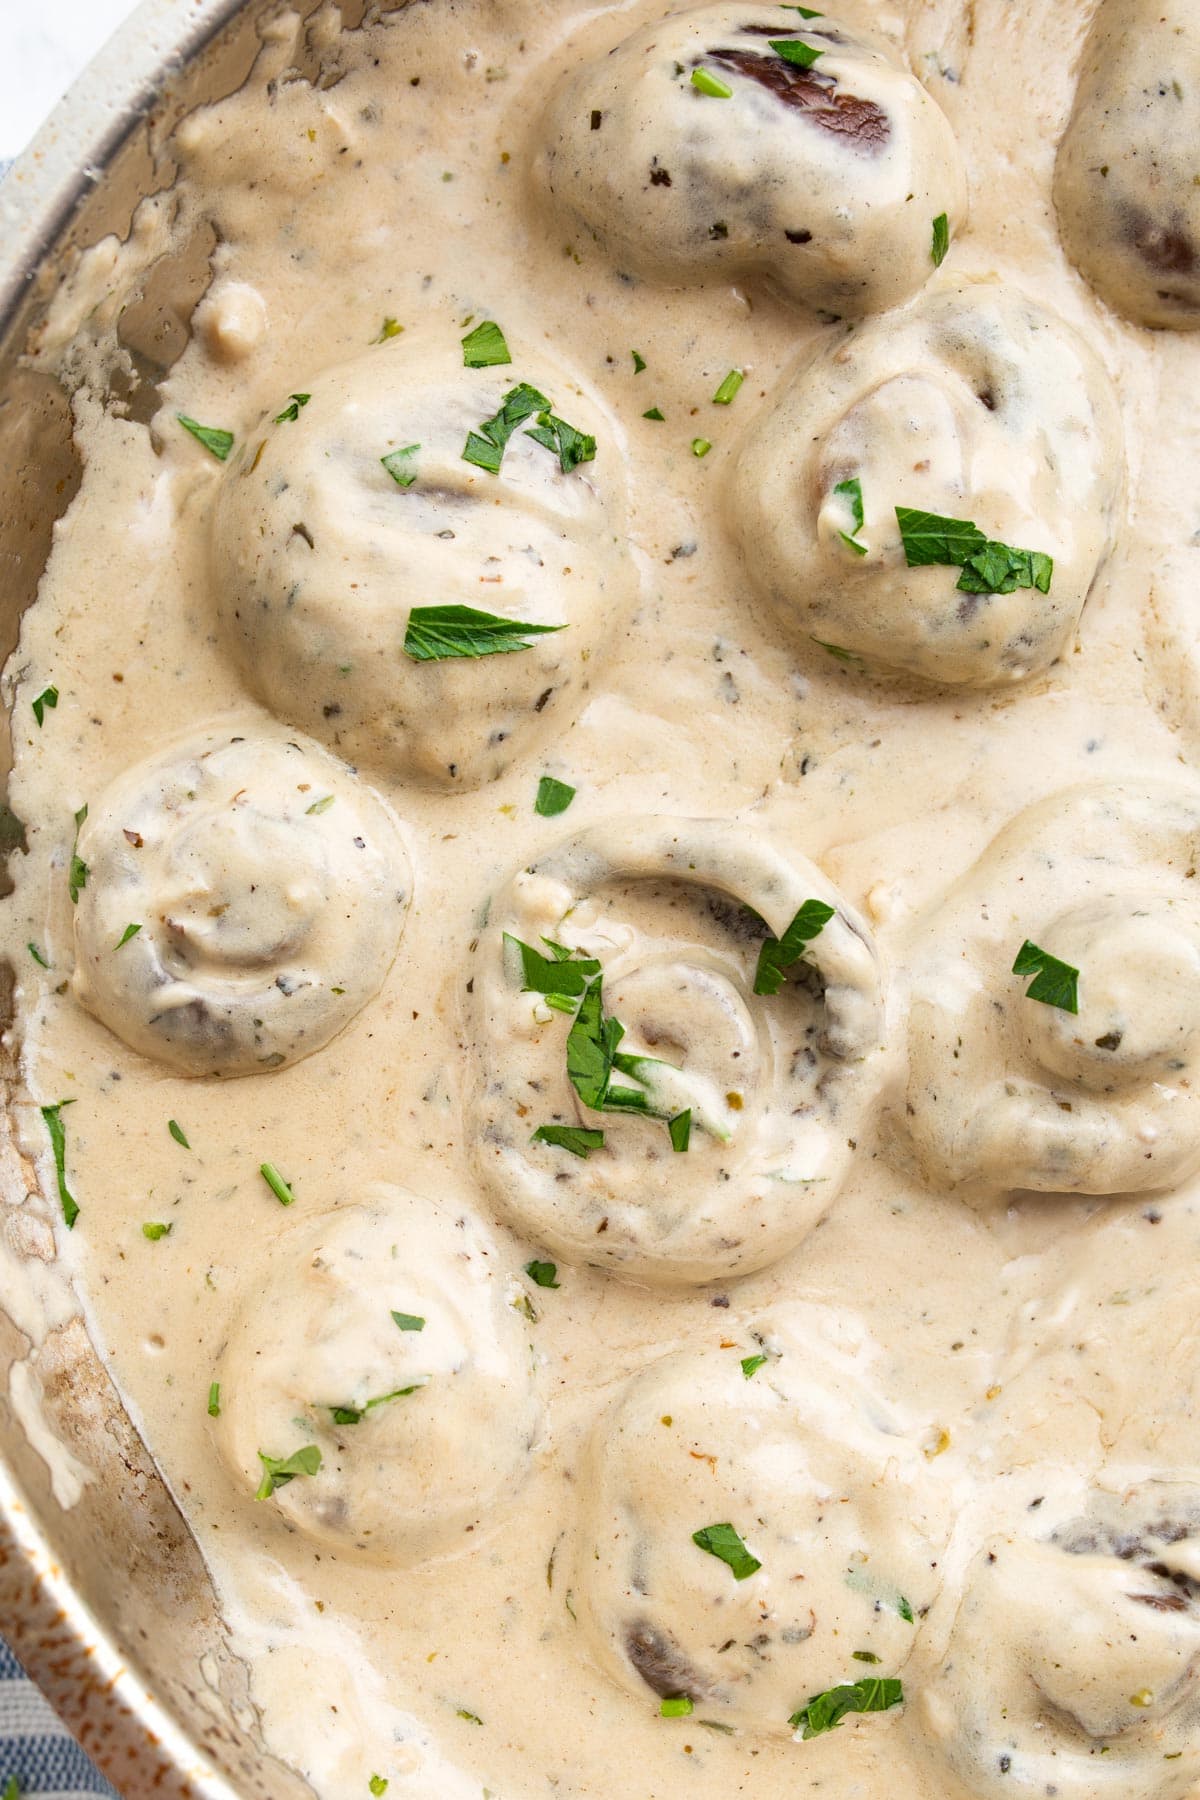 Creamy garlic mushrooms topped with fresh chopped parsley in a stainless steel skillet.